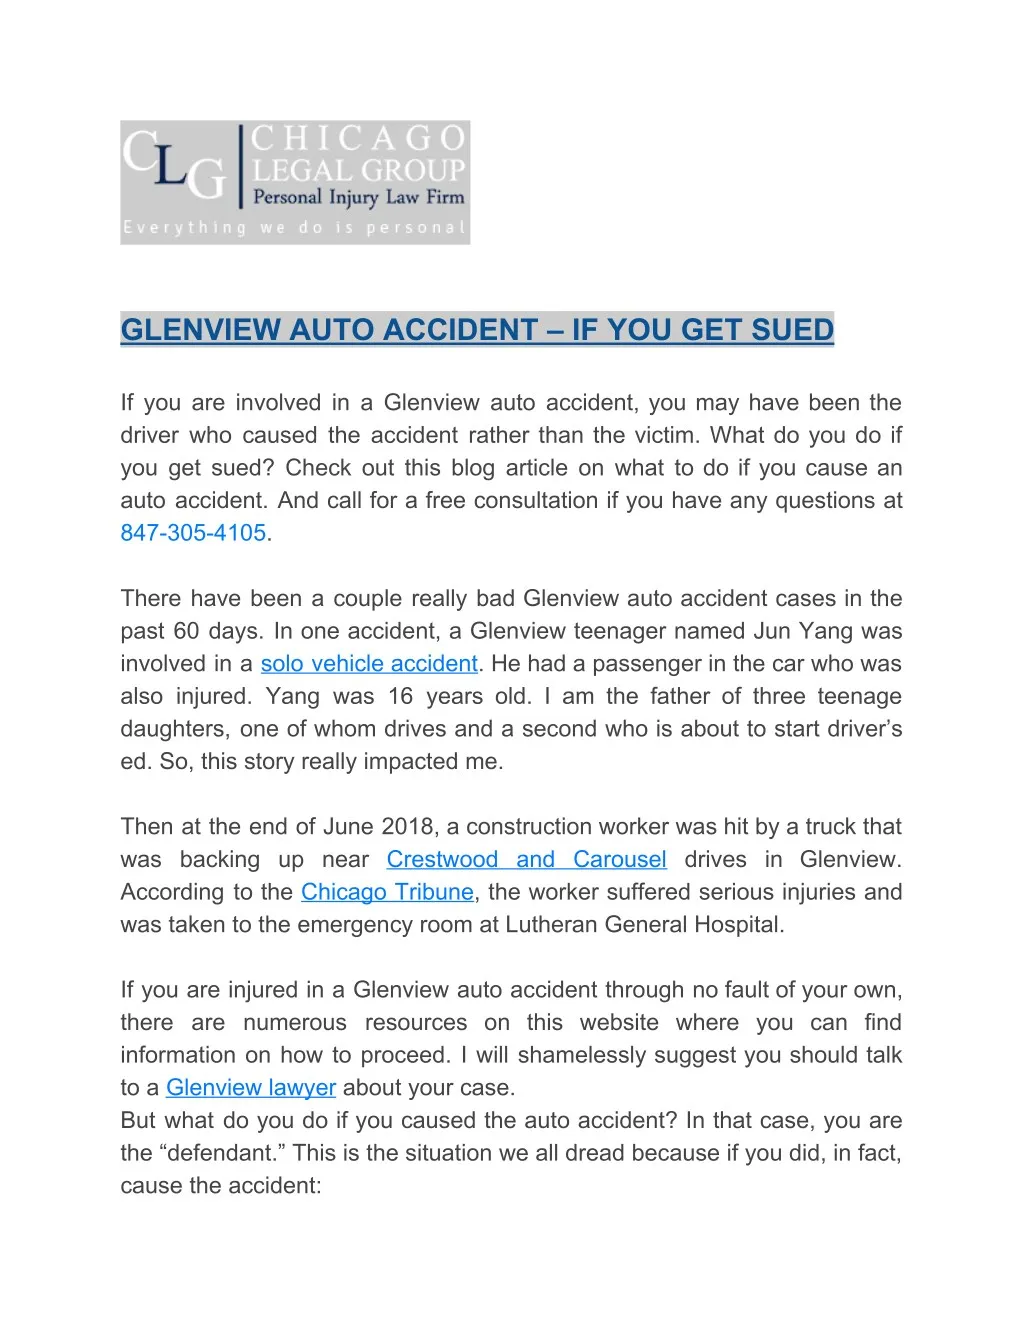 glenview auto accident if you get sued